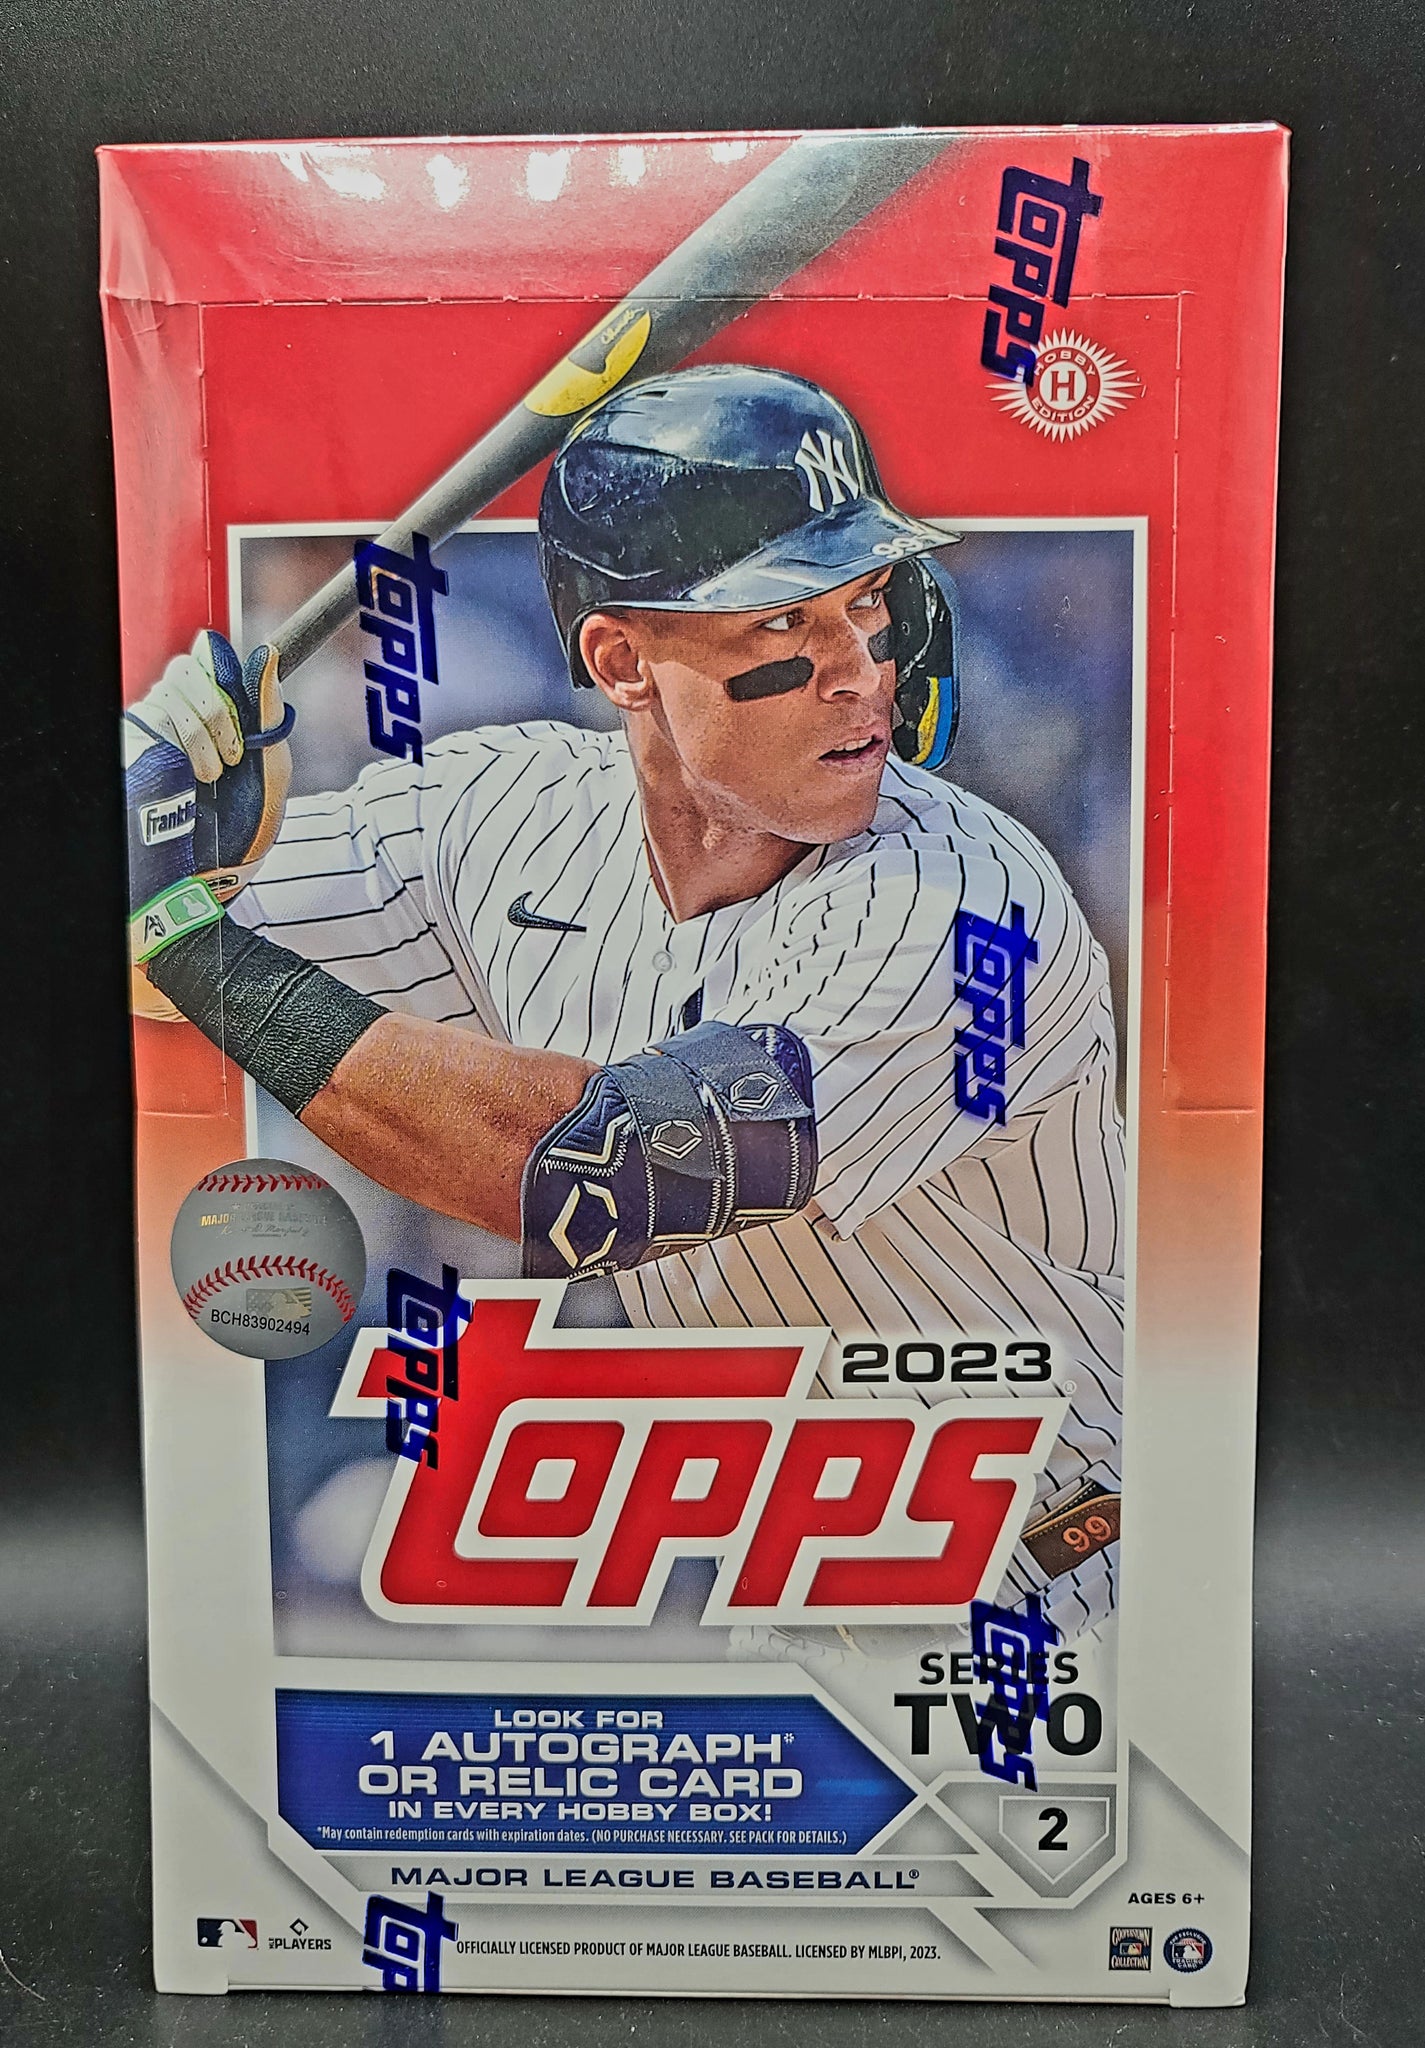 2007 Topps Updates & Highlights Baseball Checklist, Info, Boxes, More